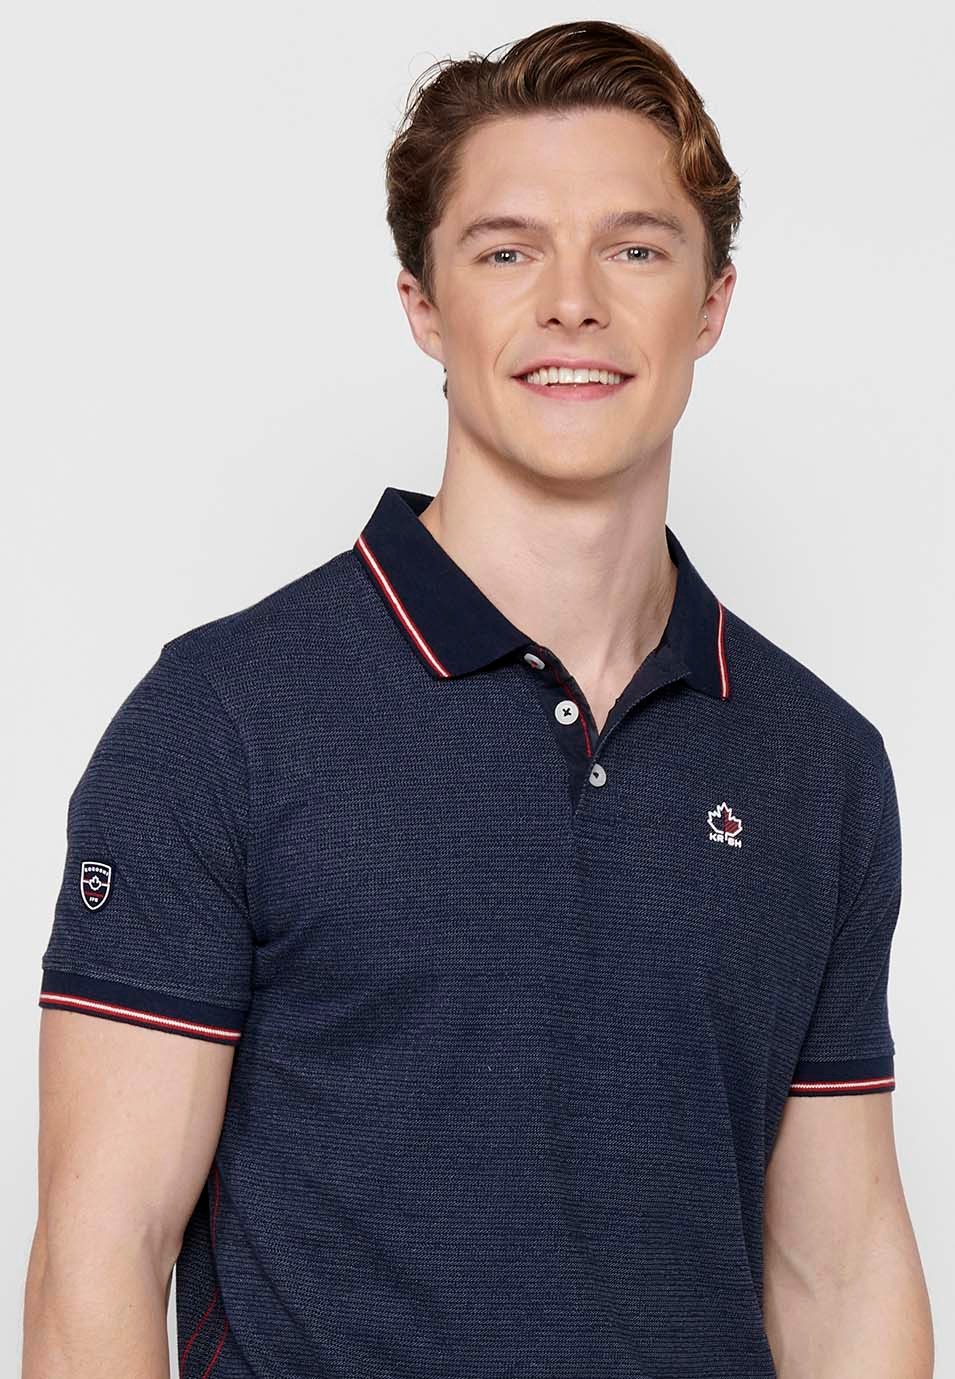 Short-sleeved polo shirt with shirt collar with buttons in Navy Color for Men 4